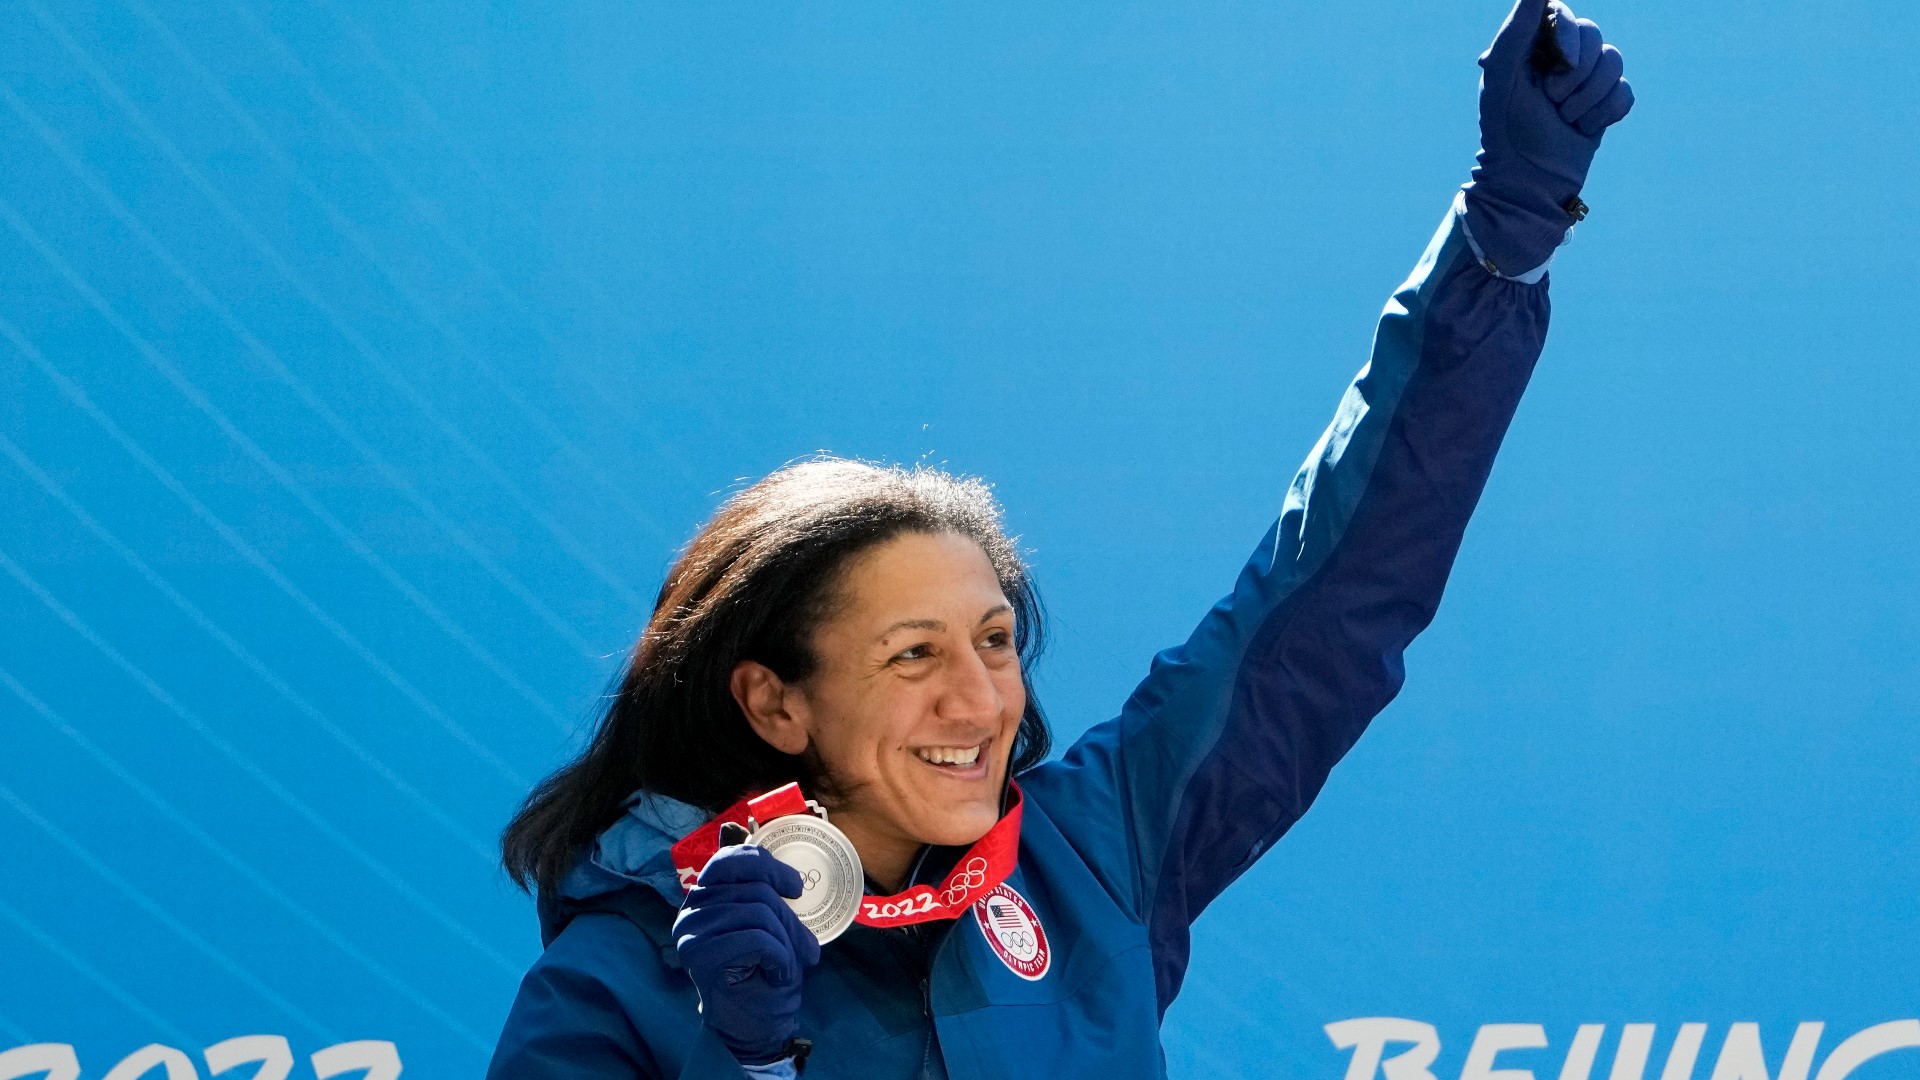 Elana Meyers Taylor will lead Team USA at the Winter Olympics Closing Ceremony. She missed her chance to carry the flag in the Opening Ceremony due to COVID.